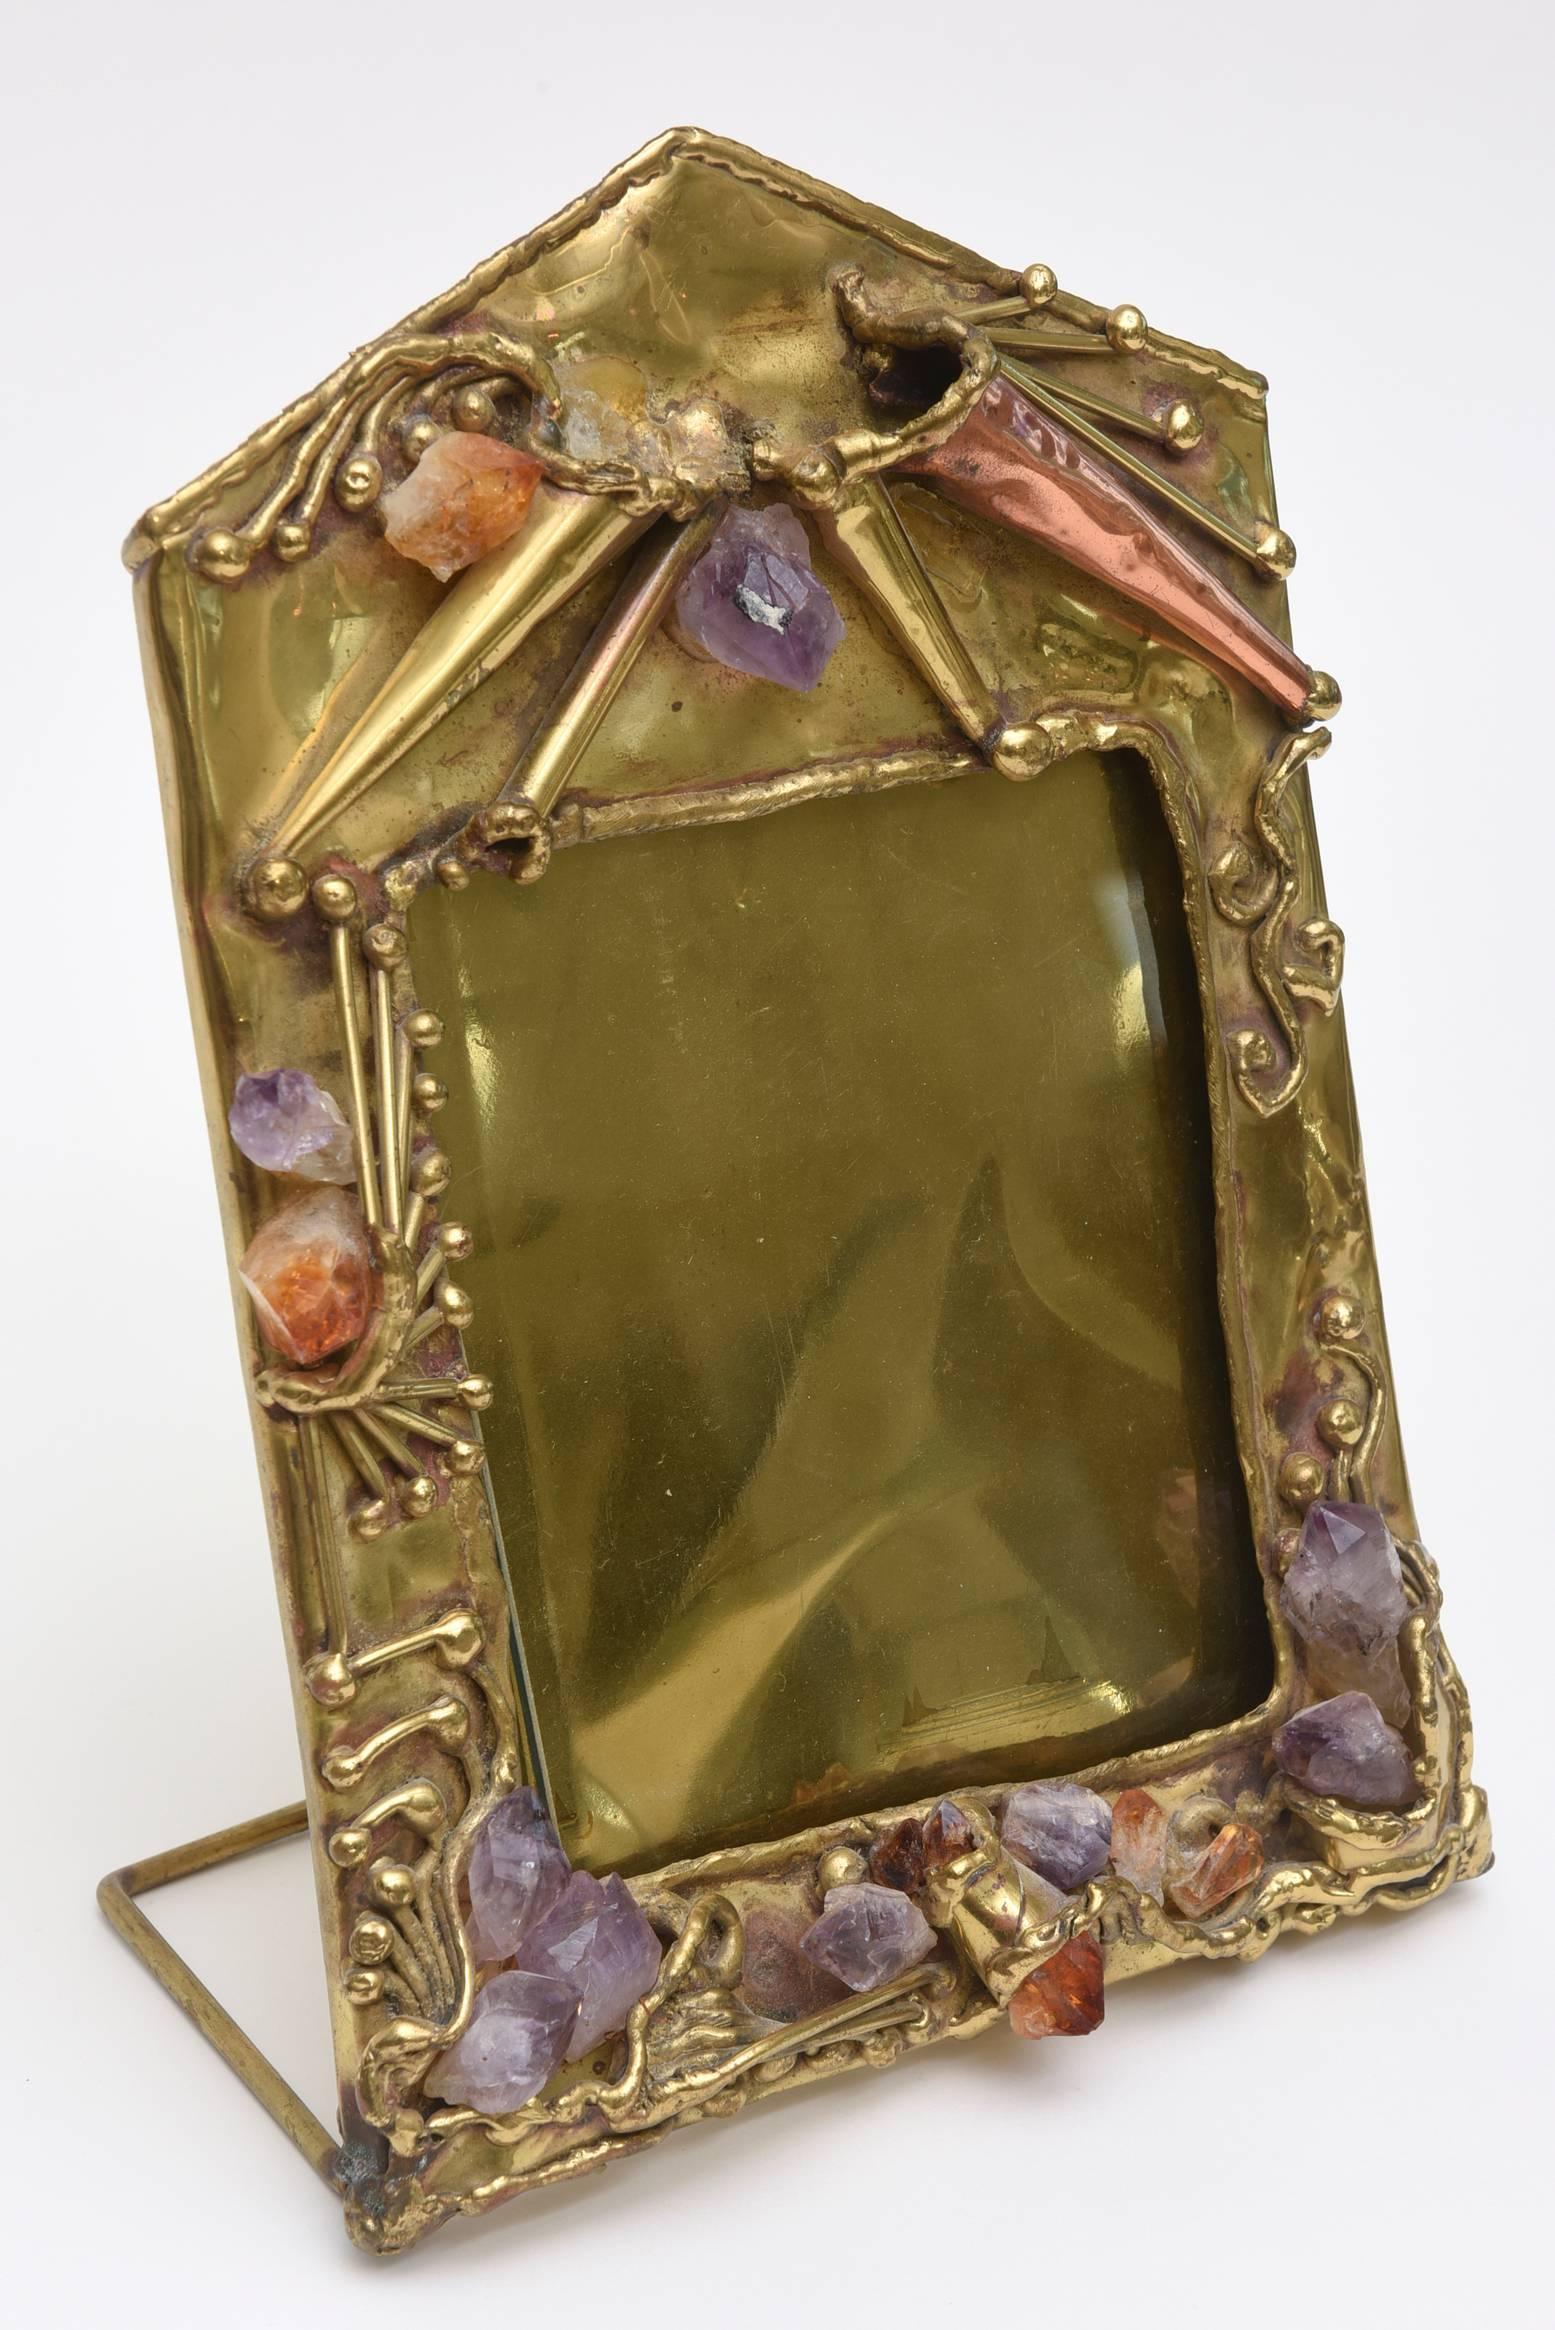 This beautiful combination of hand forged brass mixed with copper elements and protrusions of chunks of amethyst rose quartz and quartz picture frame is one of a kind. It is vintage and from the 1970s. It has a sculptural entity to it. Please note